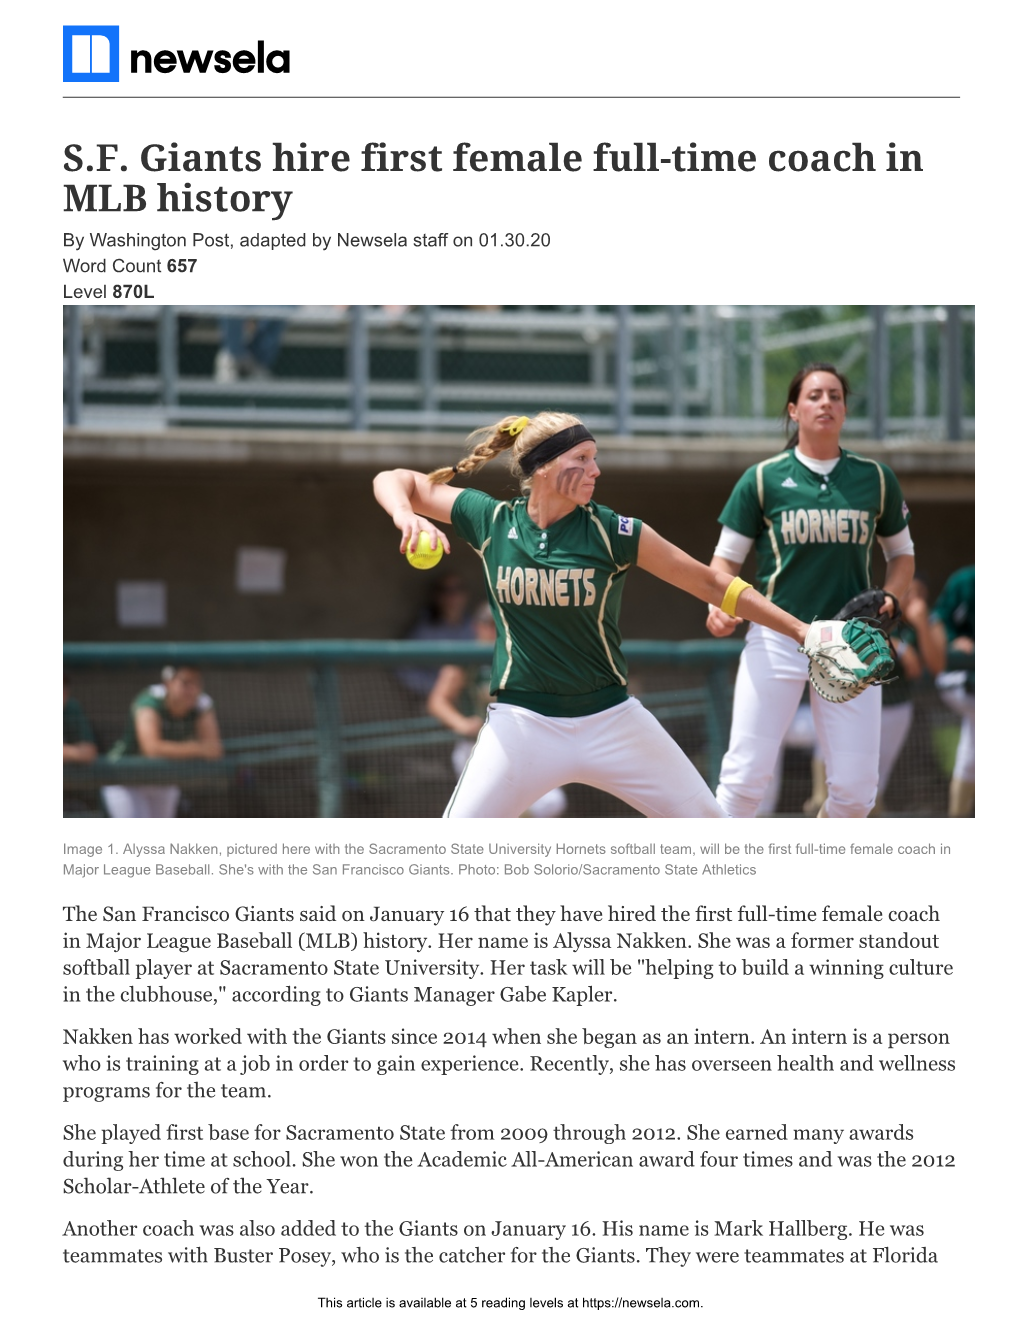 S.F. Giants Hire First Female Full-Time Coach in MLB History by Washington Post, Adapted by Newsela Staff on 01.30.20 Word Count 657 Level 870L